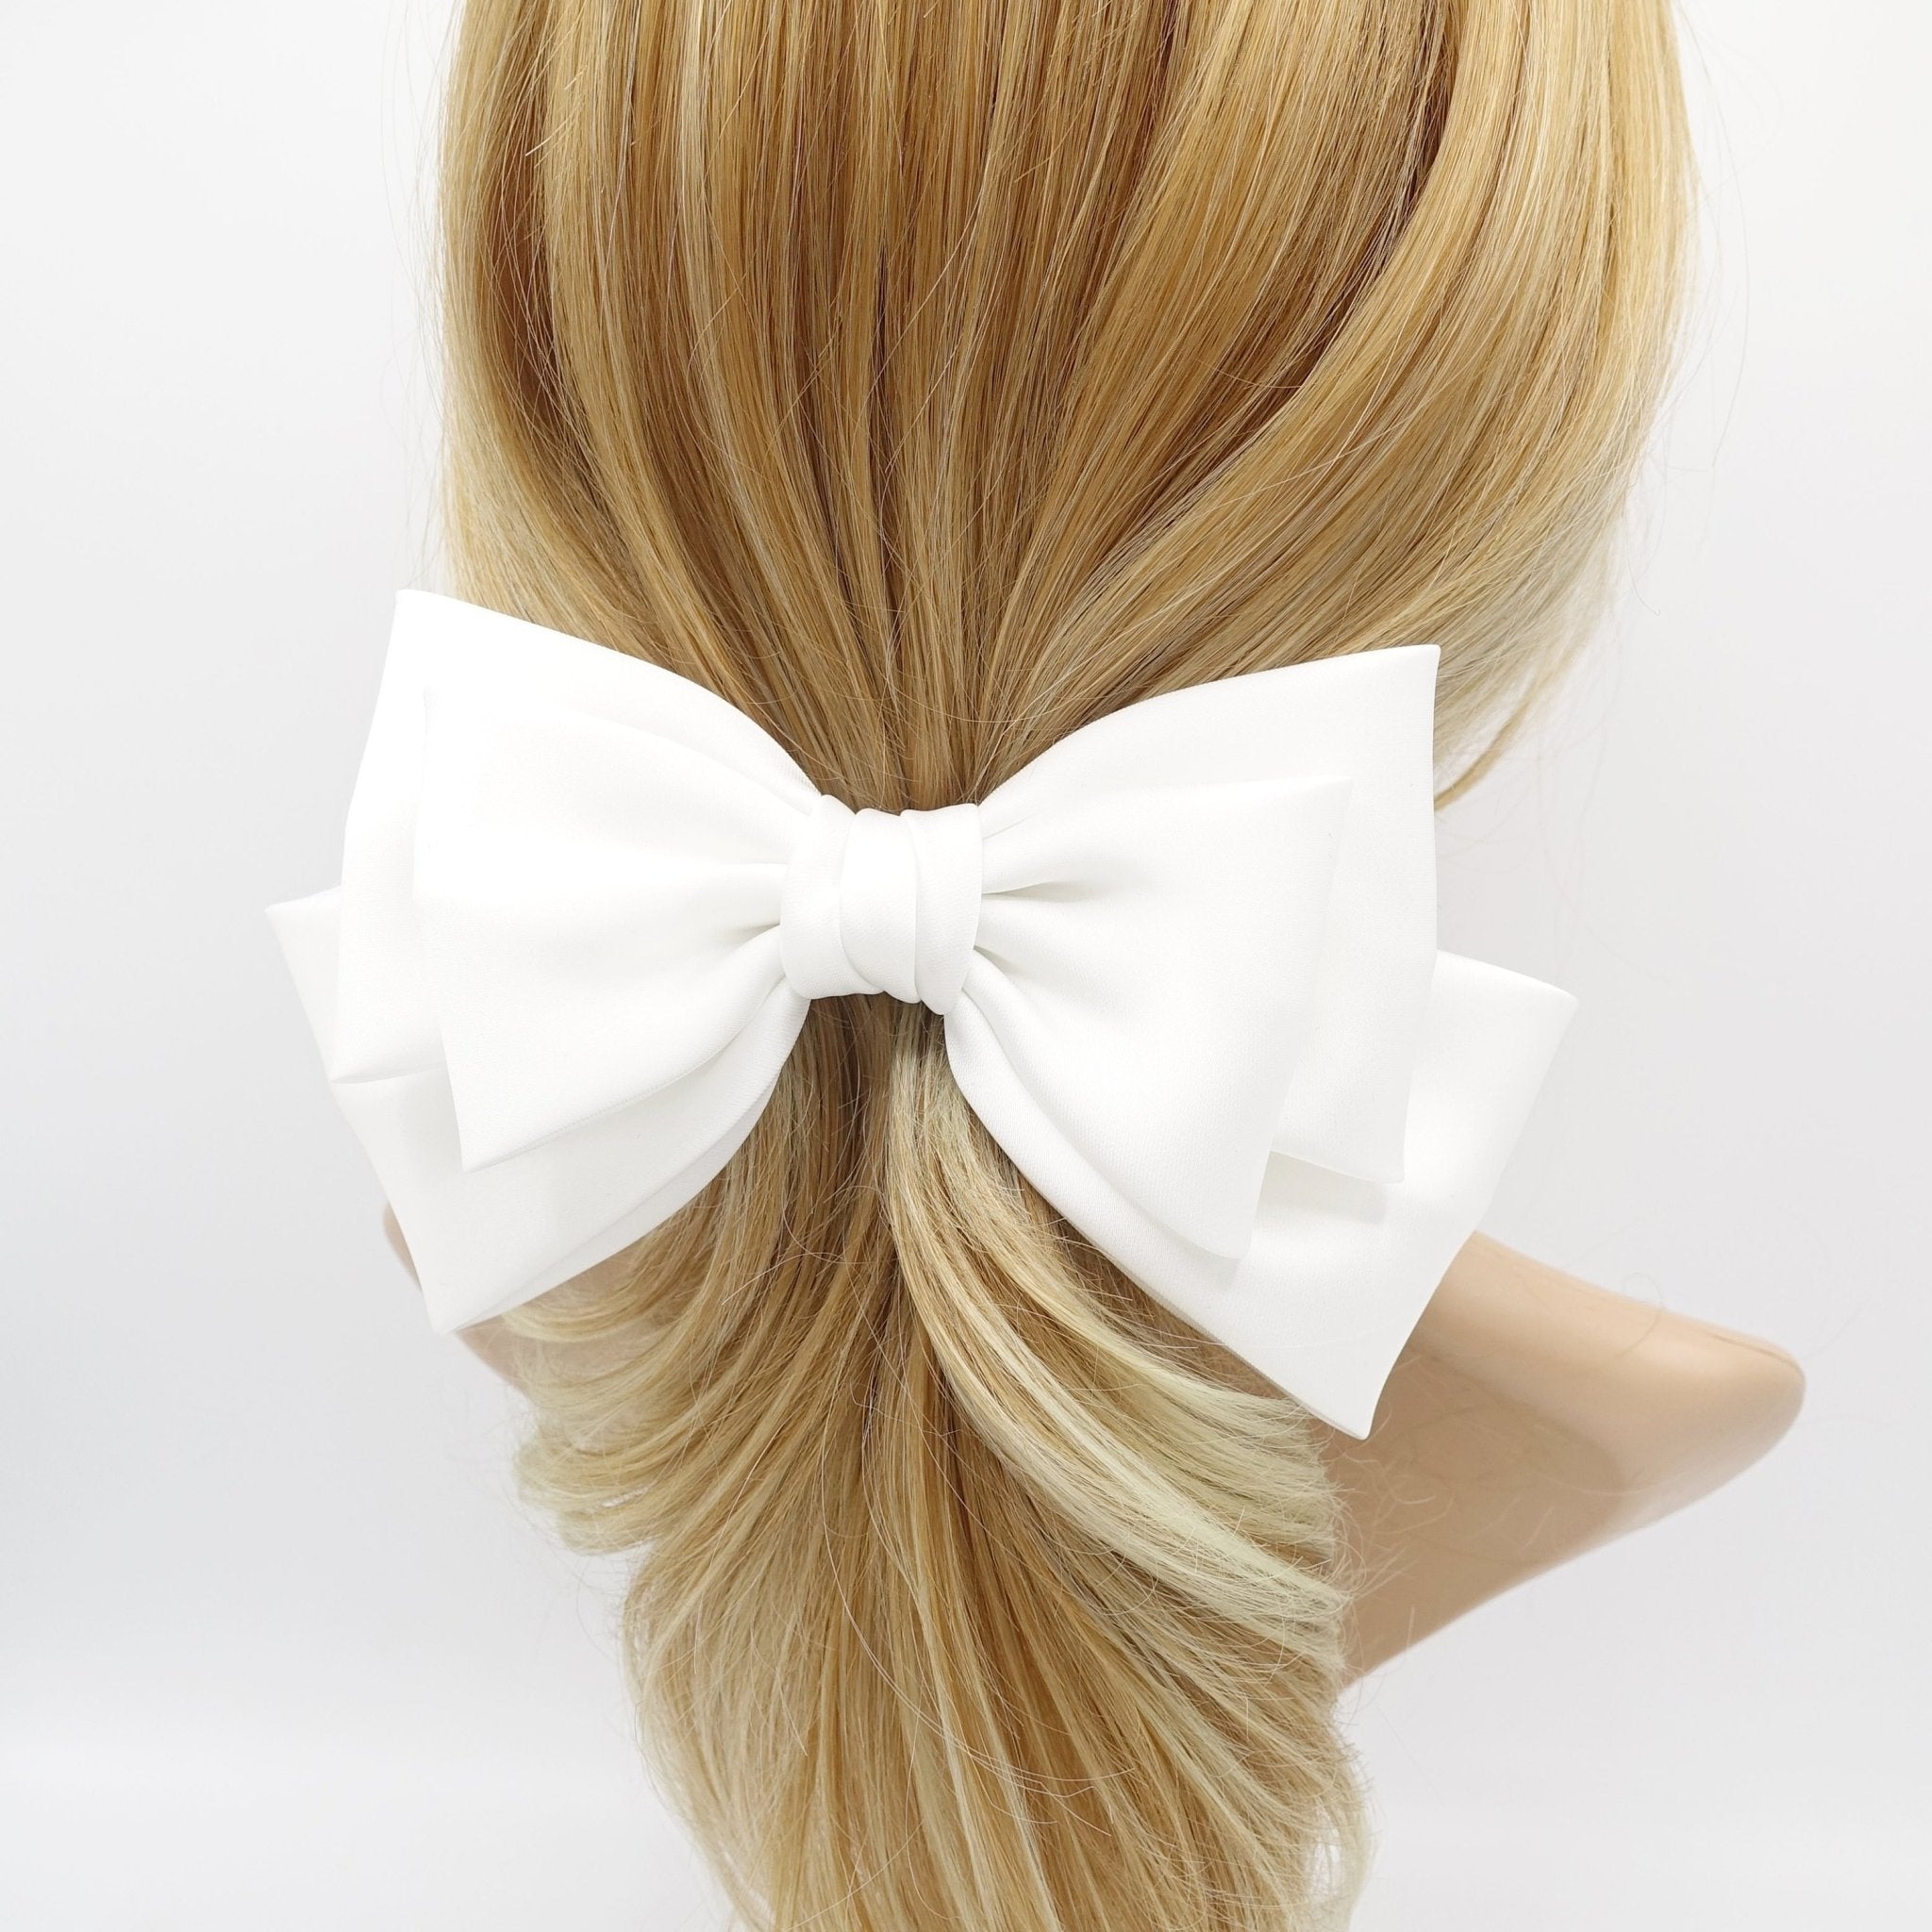 veryshine.com Barrettes & Clips White triple satin hair bow moderate style hair accessory for women